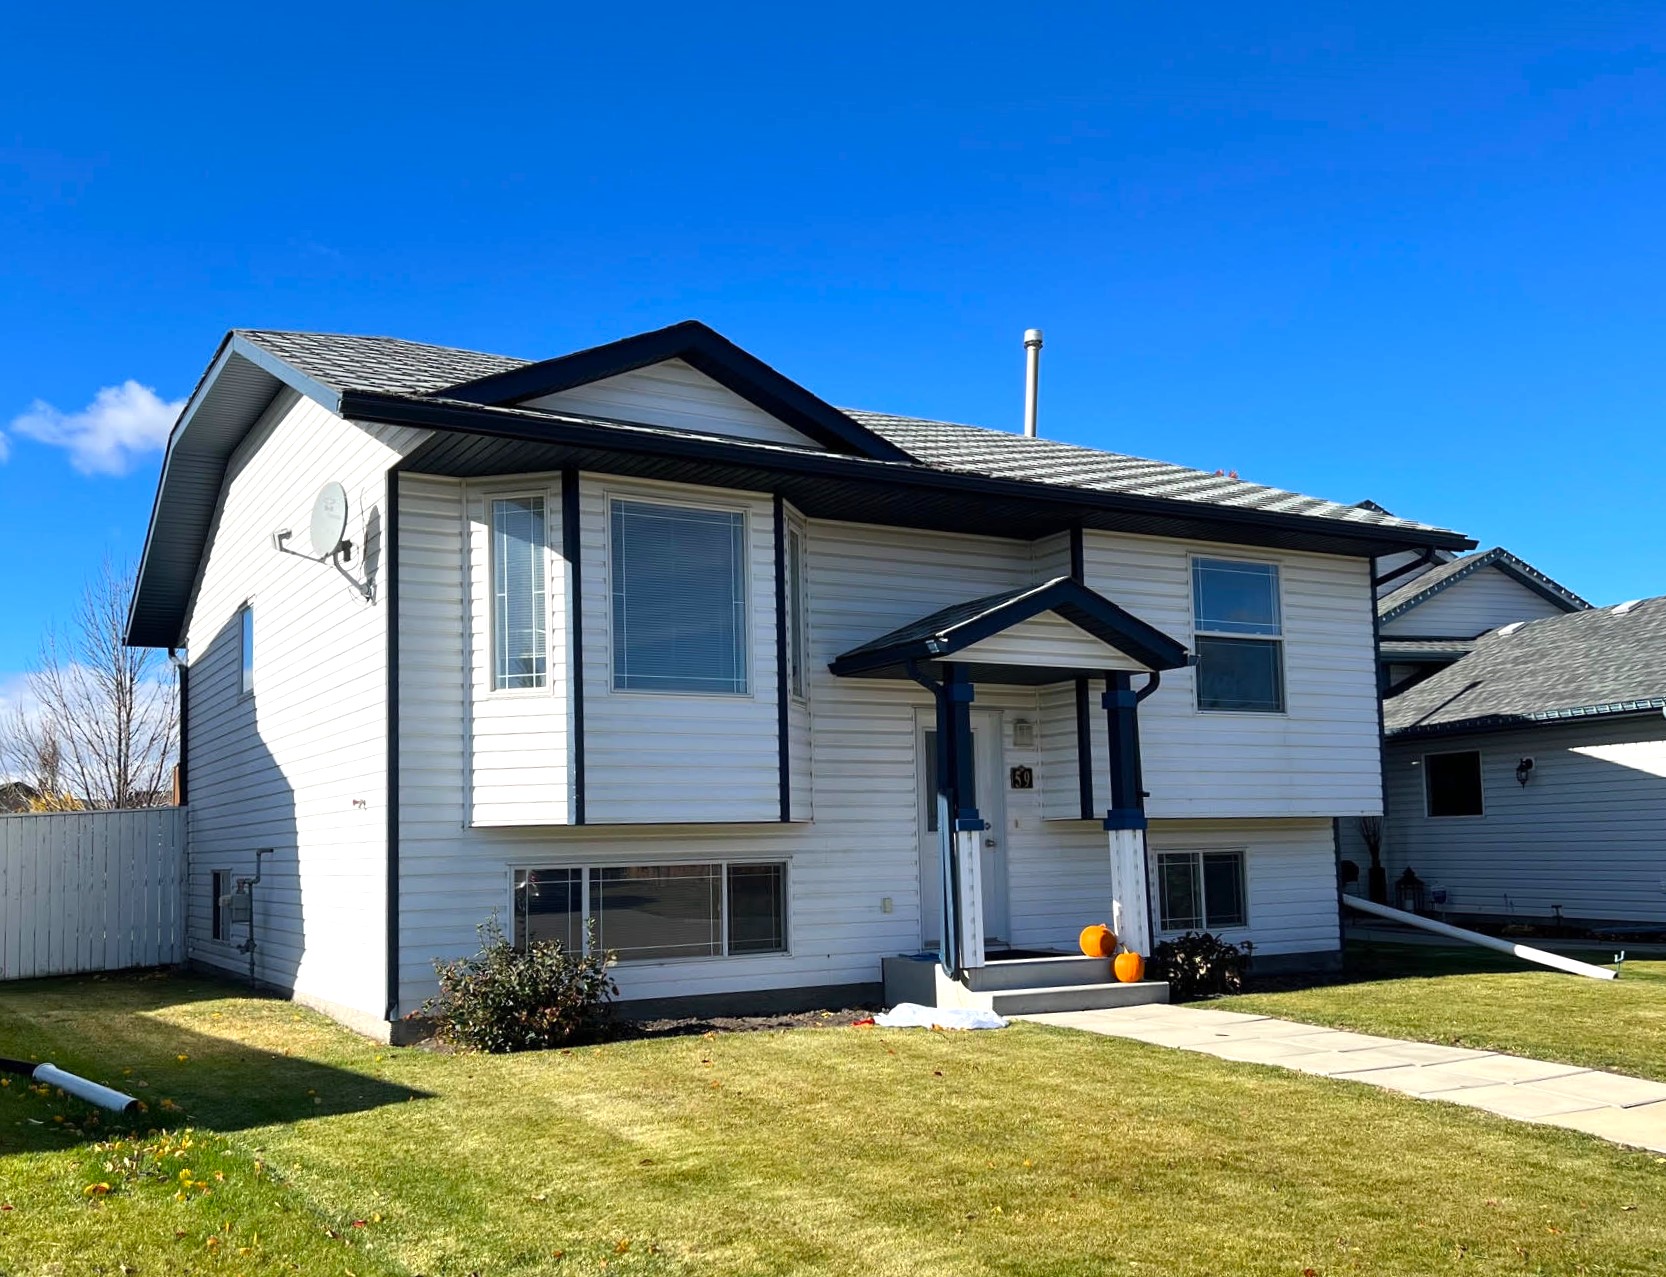 $379,900  59 Hawthorn Way, Olds   SOLD